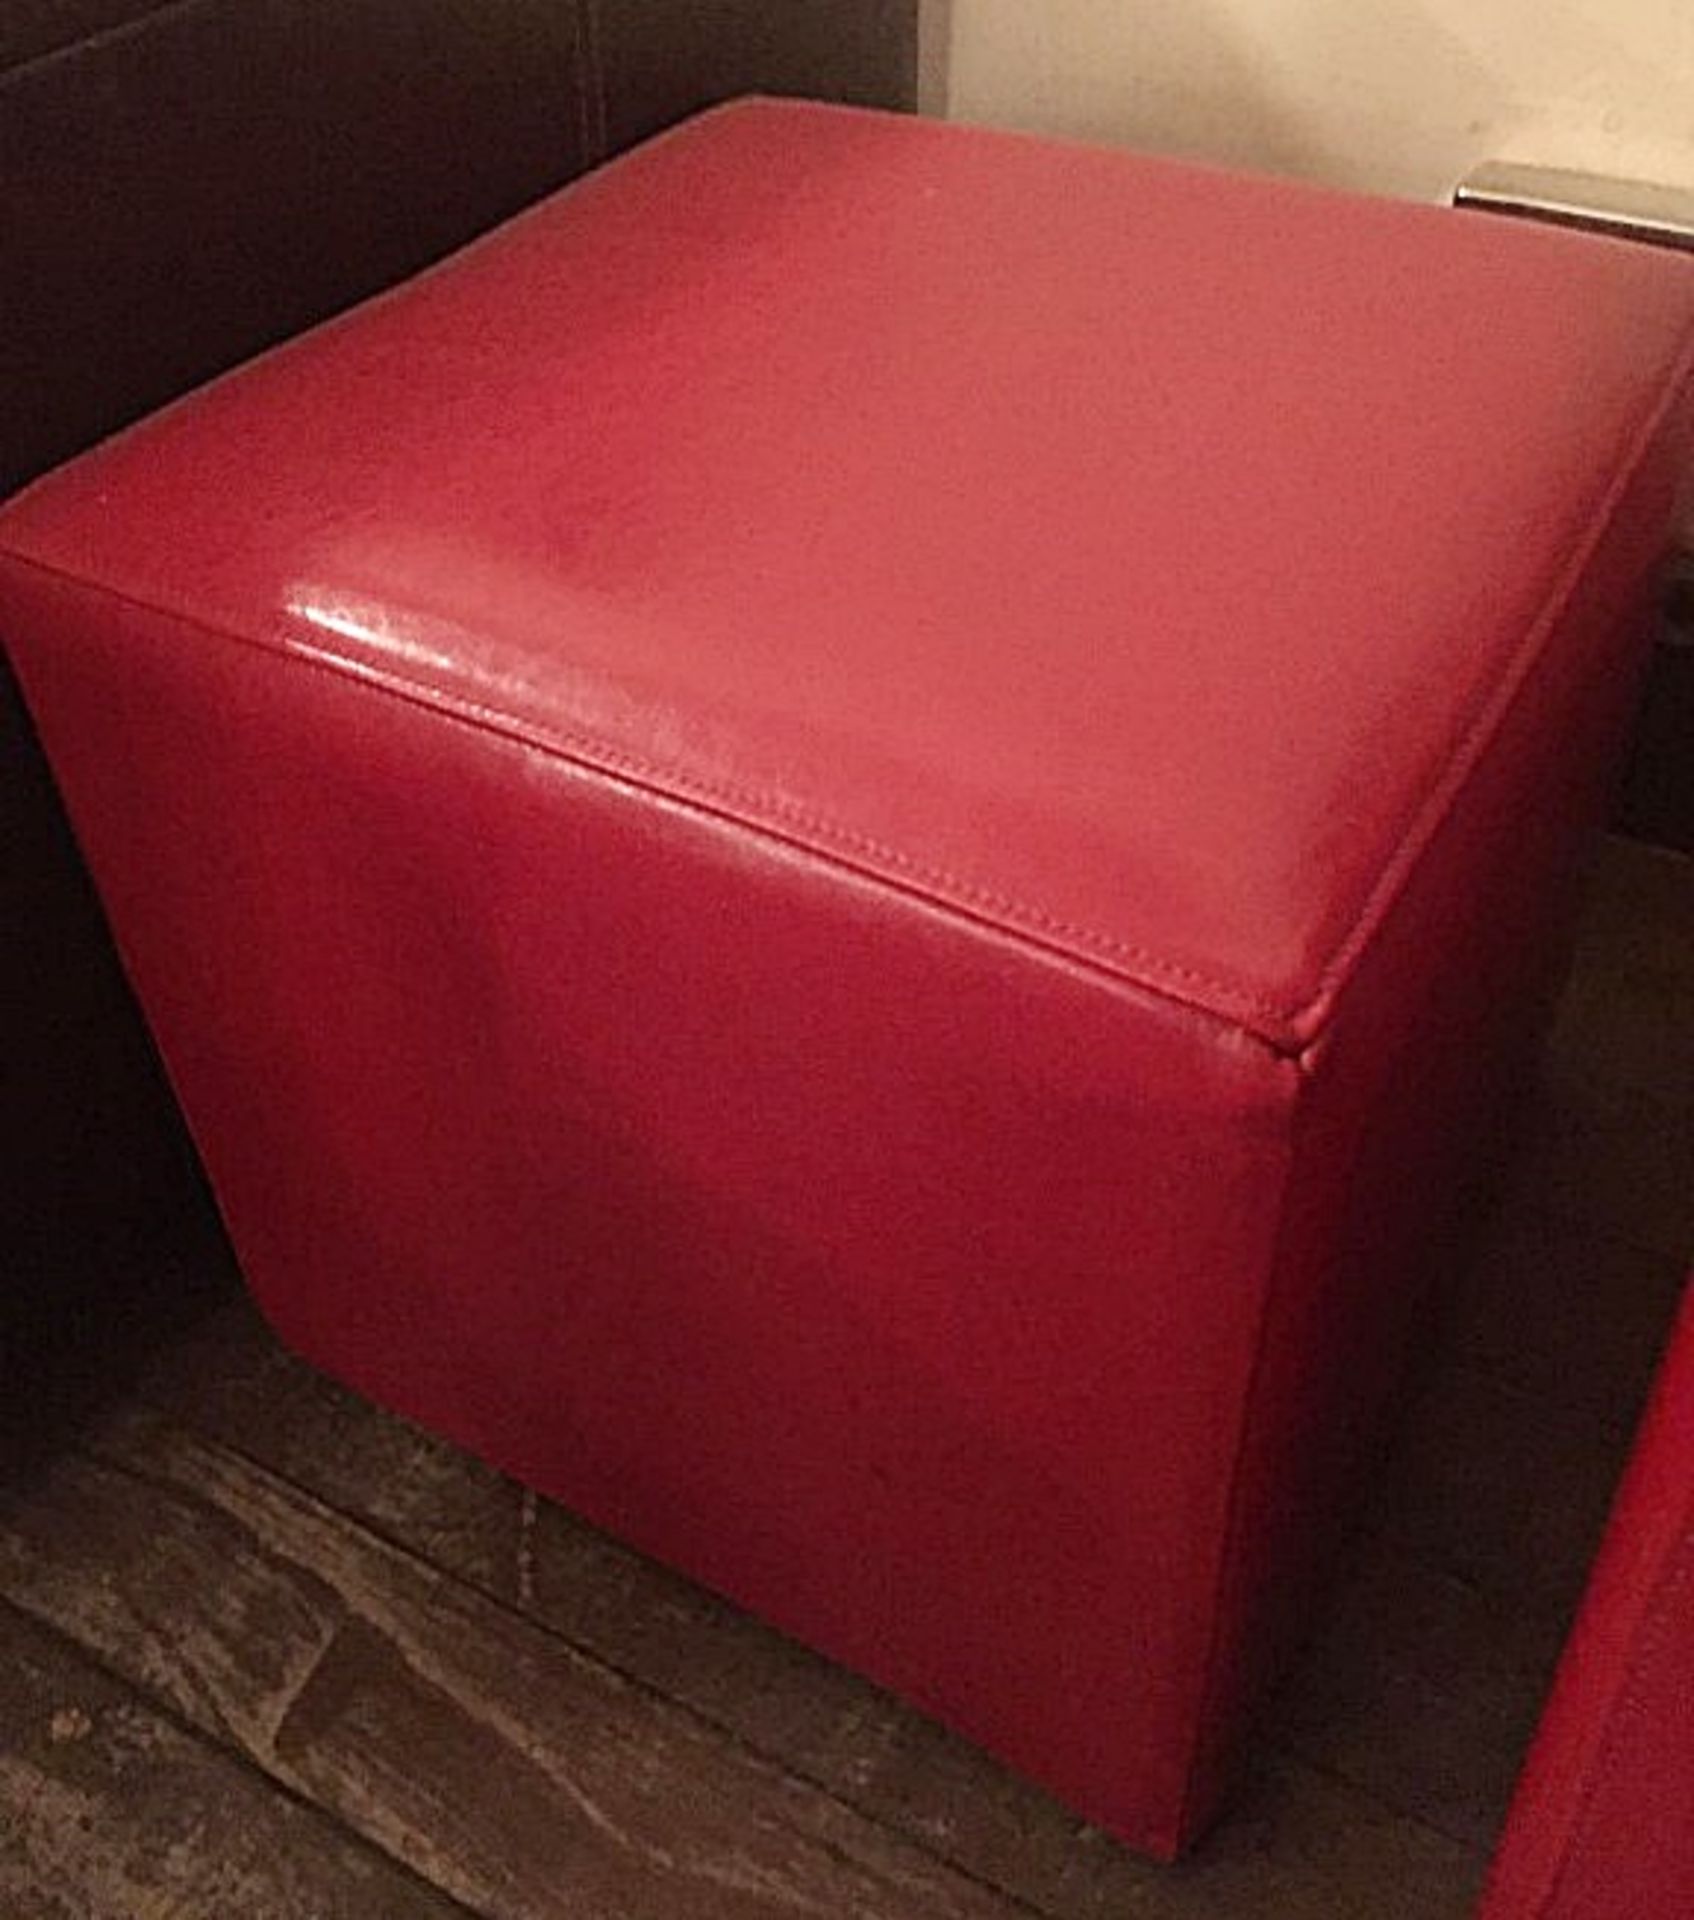 1 x Red Faux Leather Cube Footstool - Dimensions: 40x40x40cm - Ref: APB017 - City Centre Bar Closure - Image 2 of 2